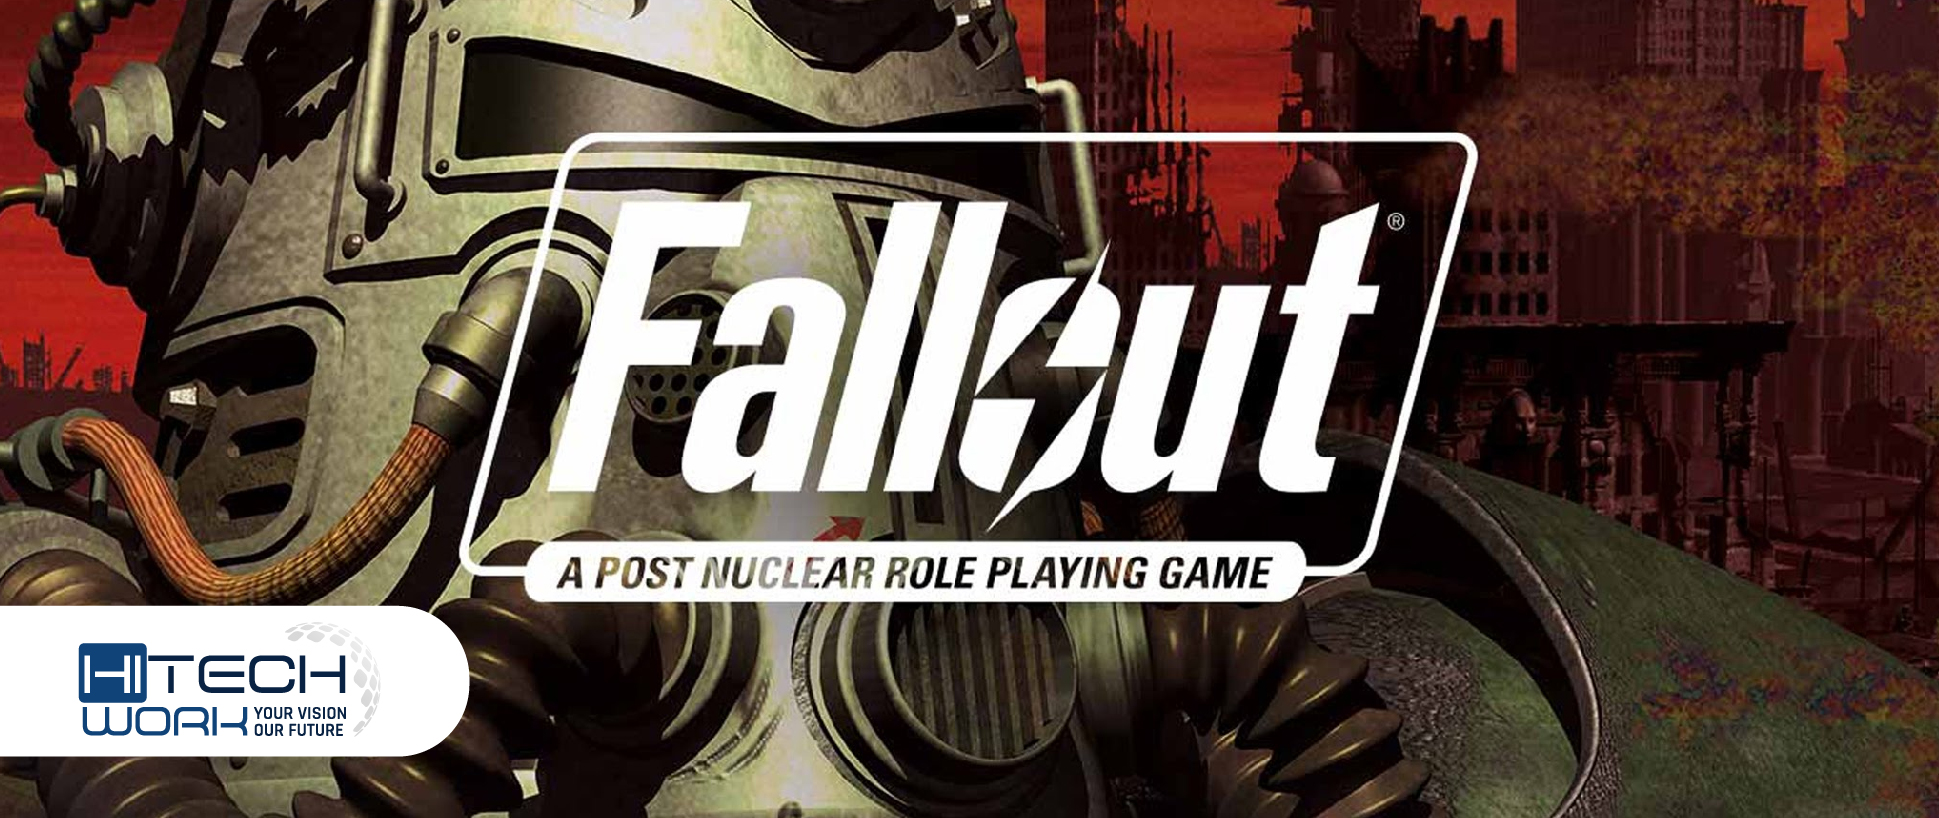 How to Cancel Fallout 1st Xbox